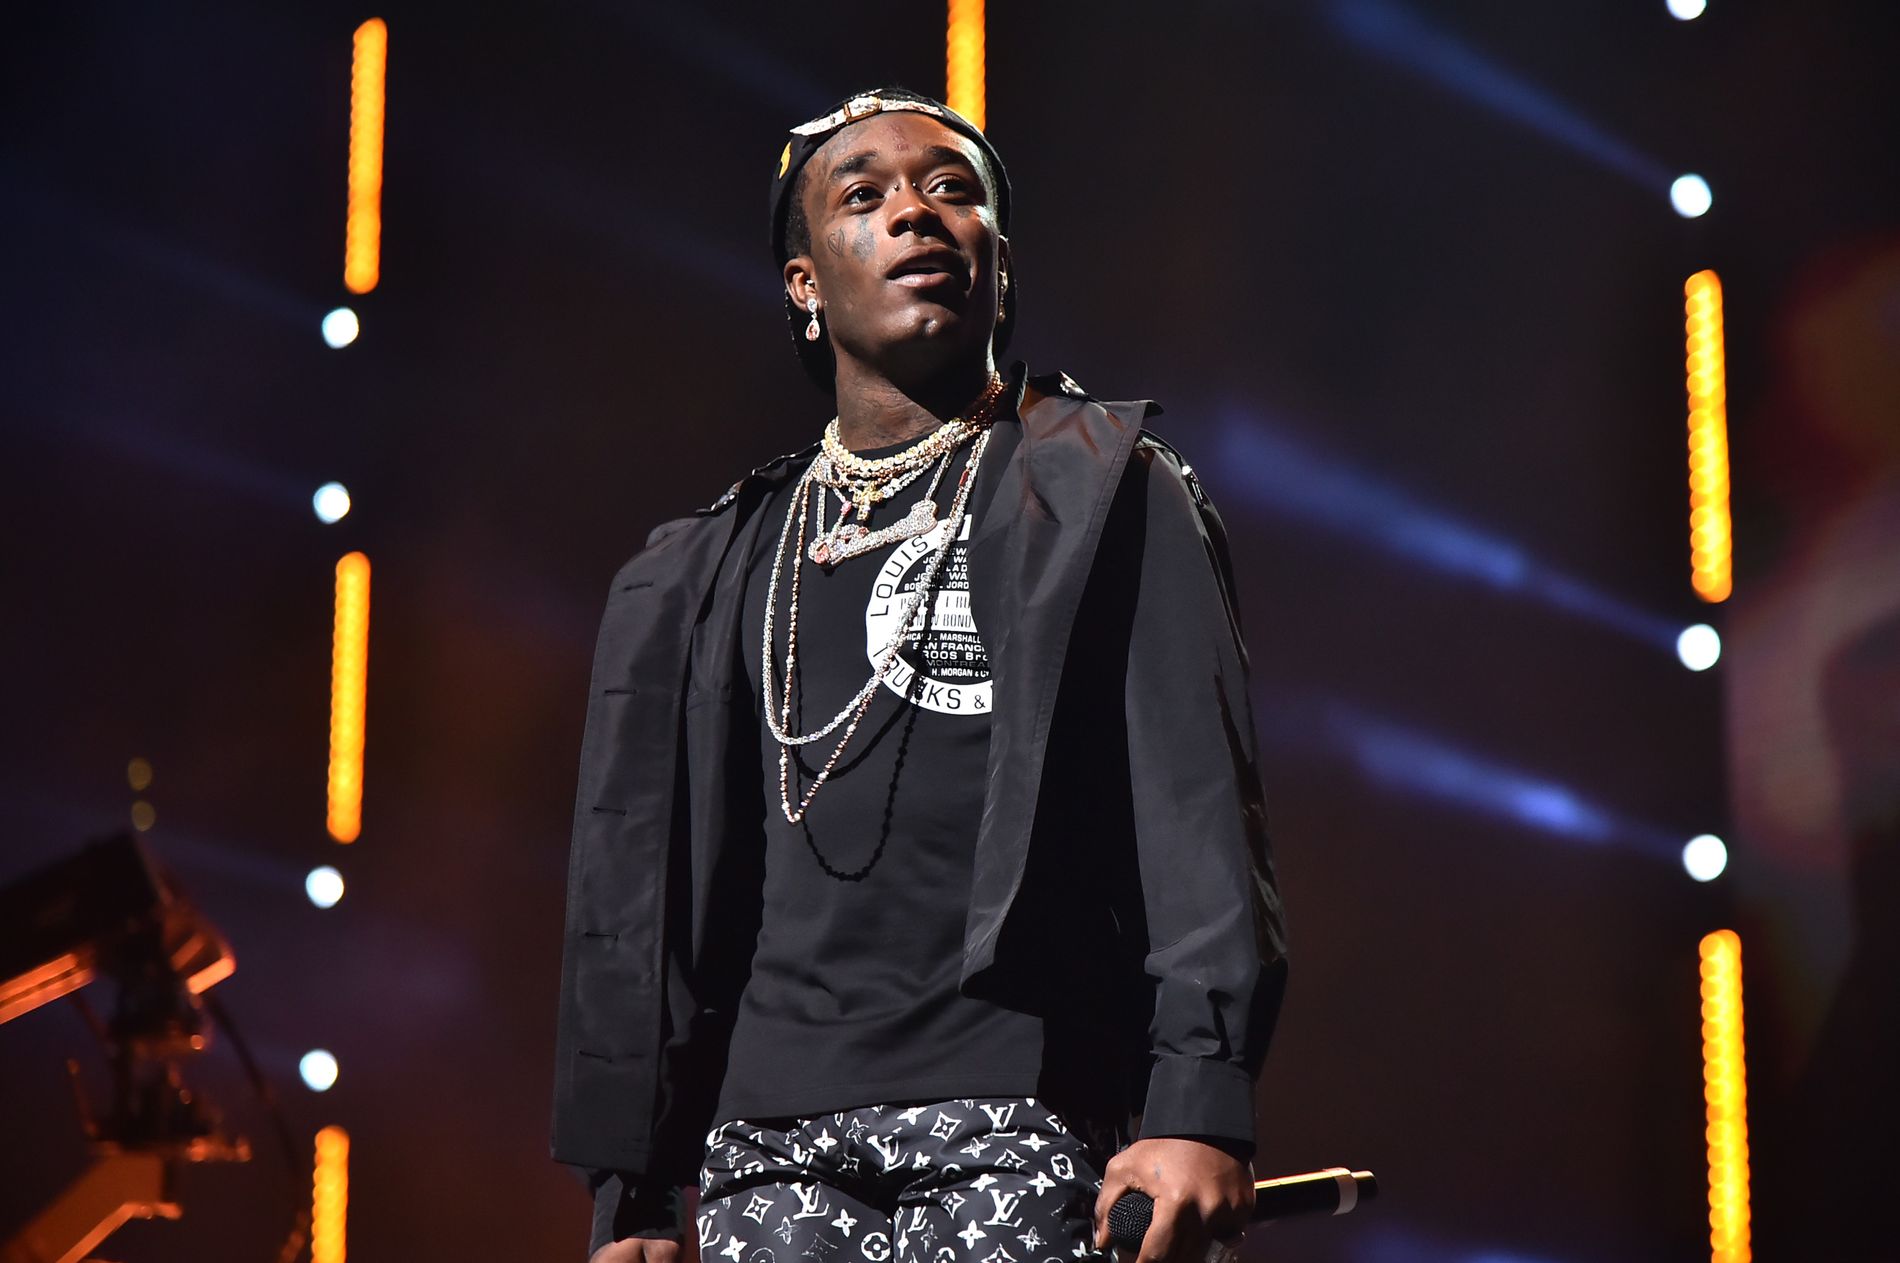 Lil Uzi Vert Expresses His Love for JT in Several Tweets: ‘She Got Me Making Bangers’